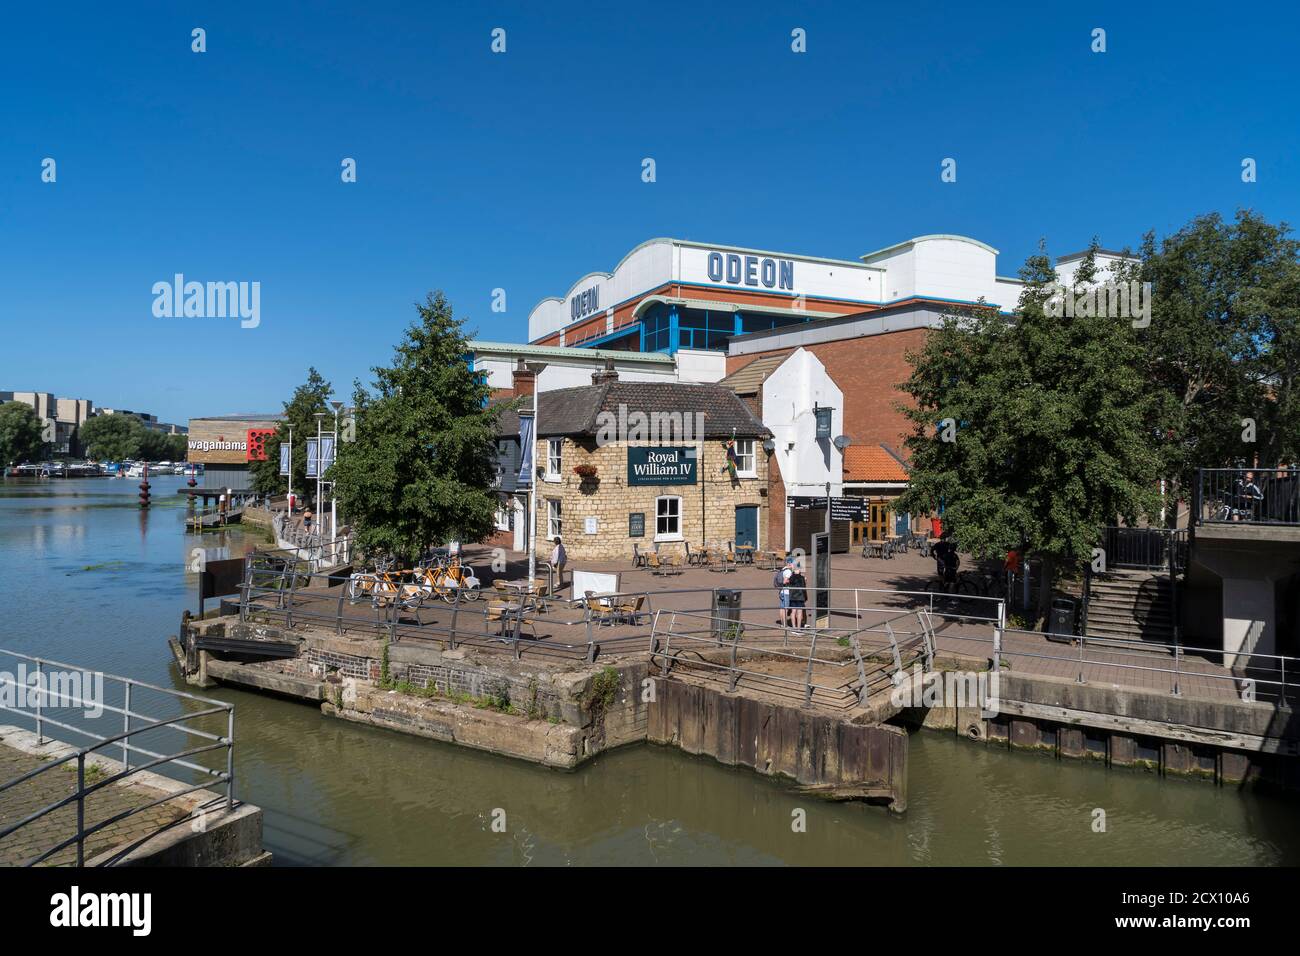 Royal William IV Brayford Wharf North Lincoln city Lincolnshire August 2020 Stock Photo